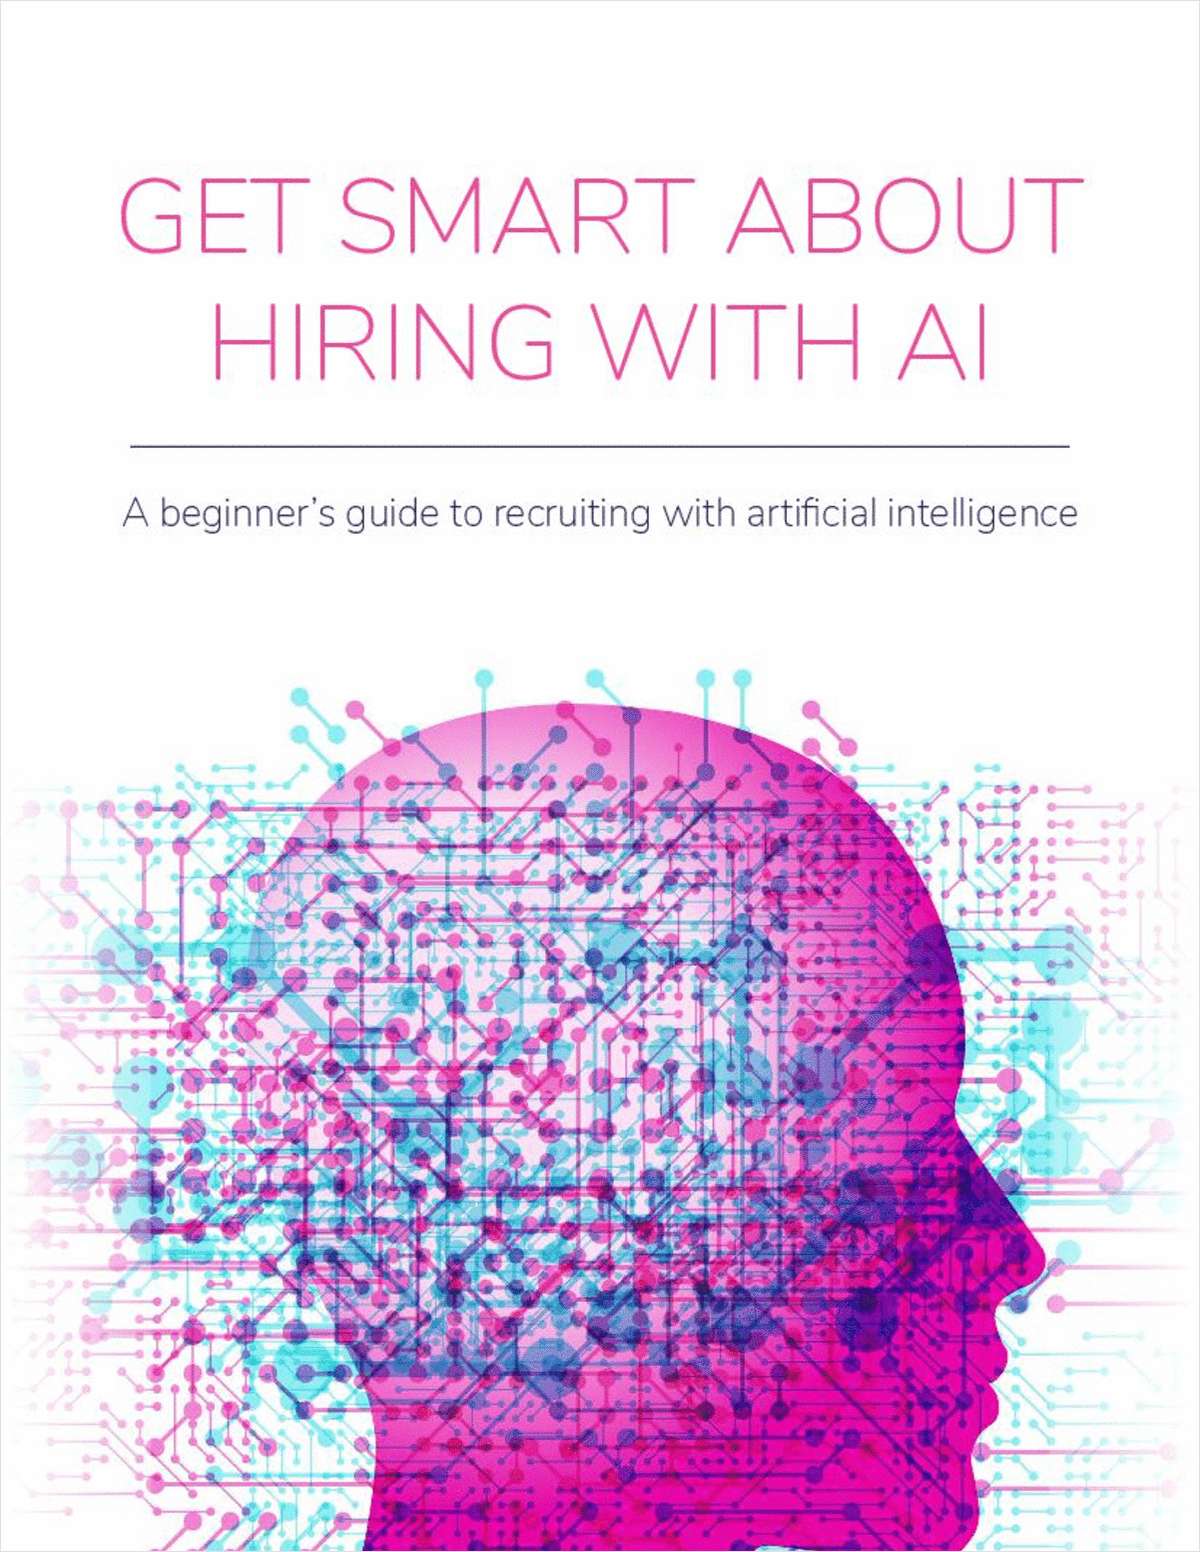 Get Smart About Hiring with AI